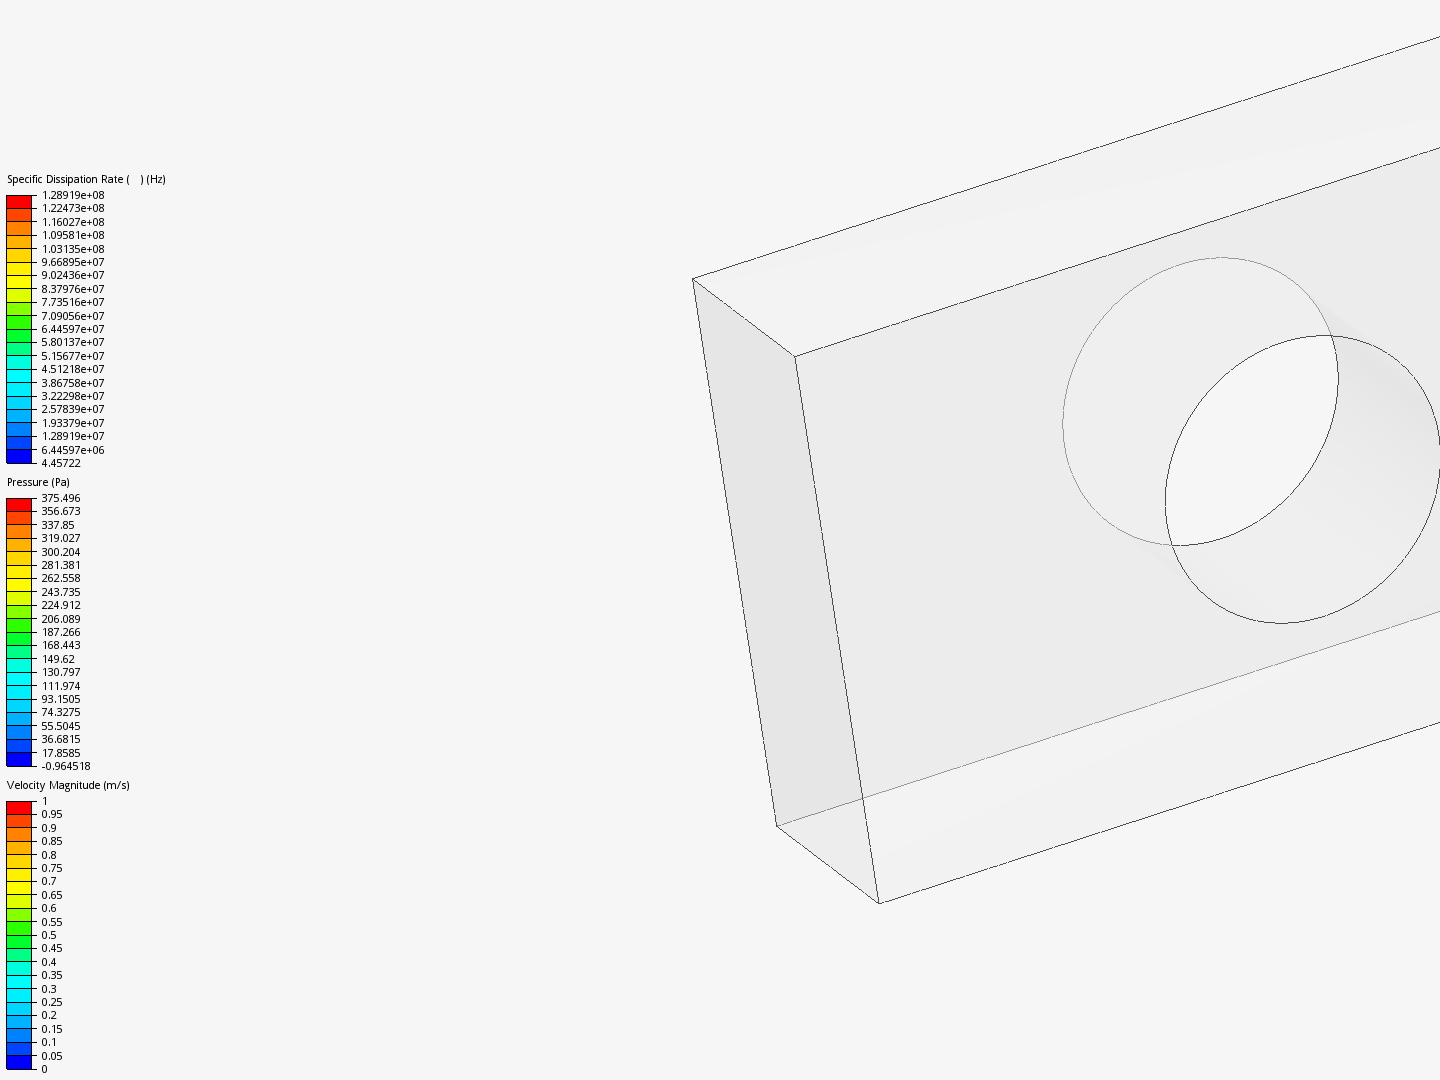 Flow past Cylinder in Channel image